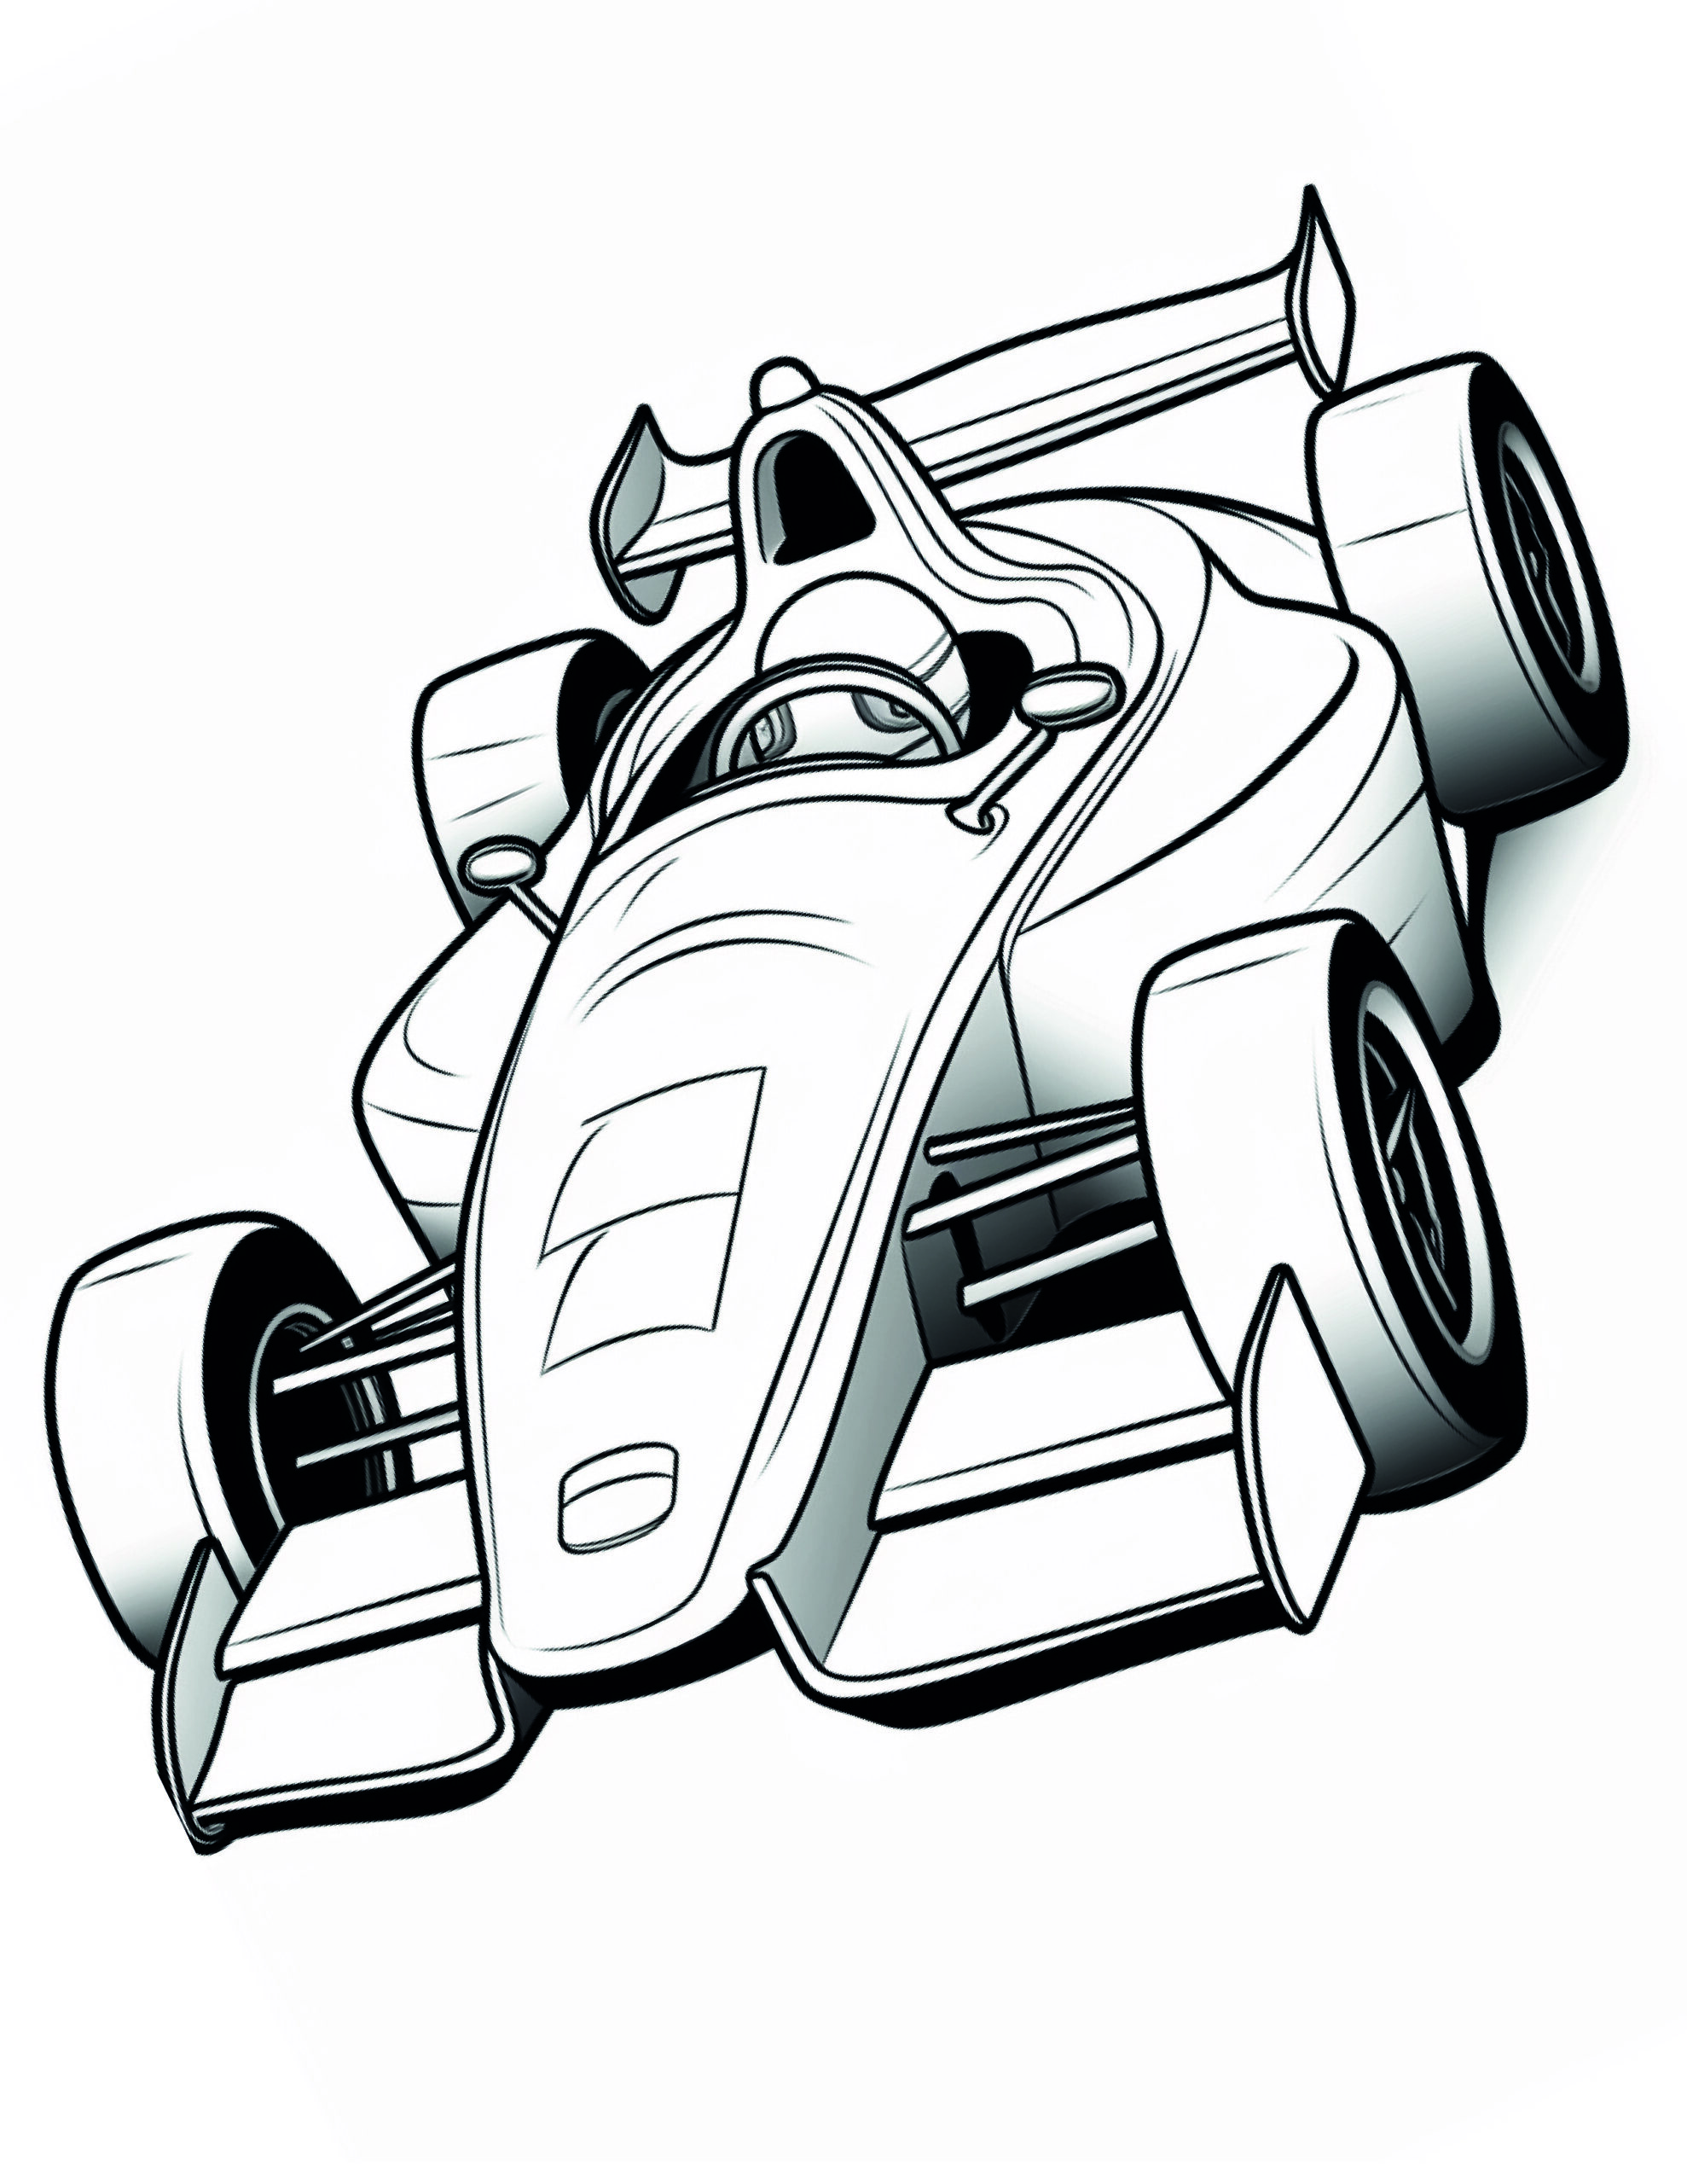 Race Car Coloring Page 4 - A line drawing of a formula one car with large cockpit.